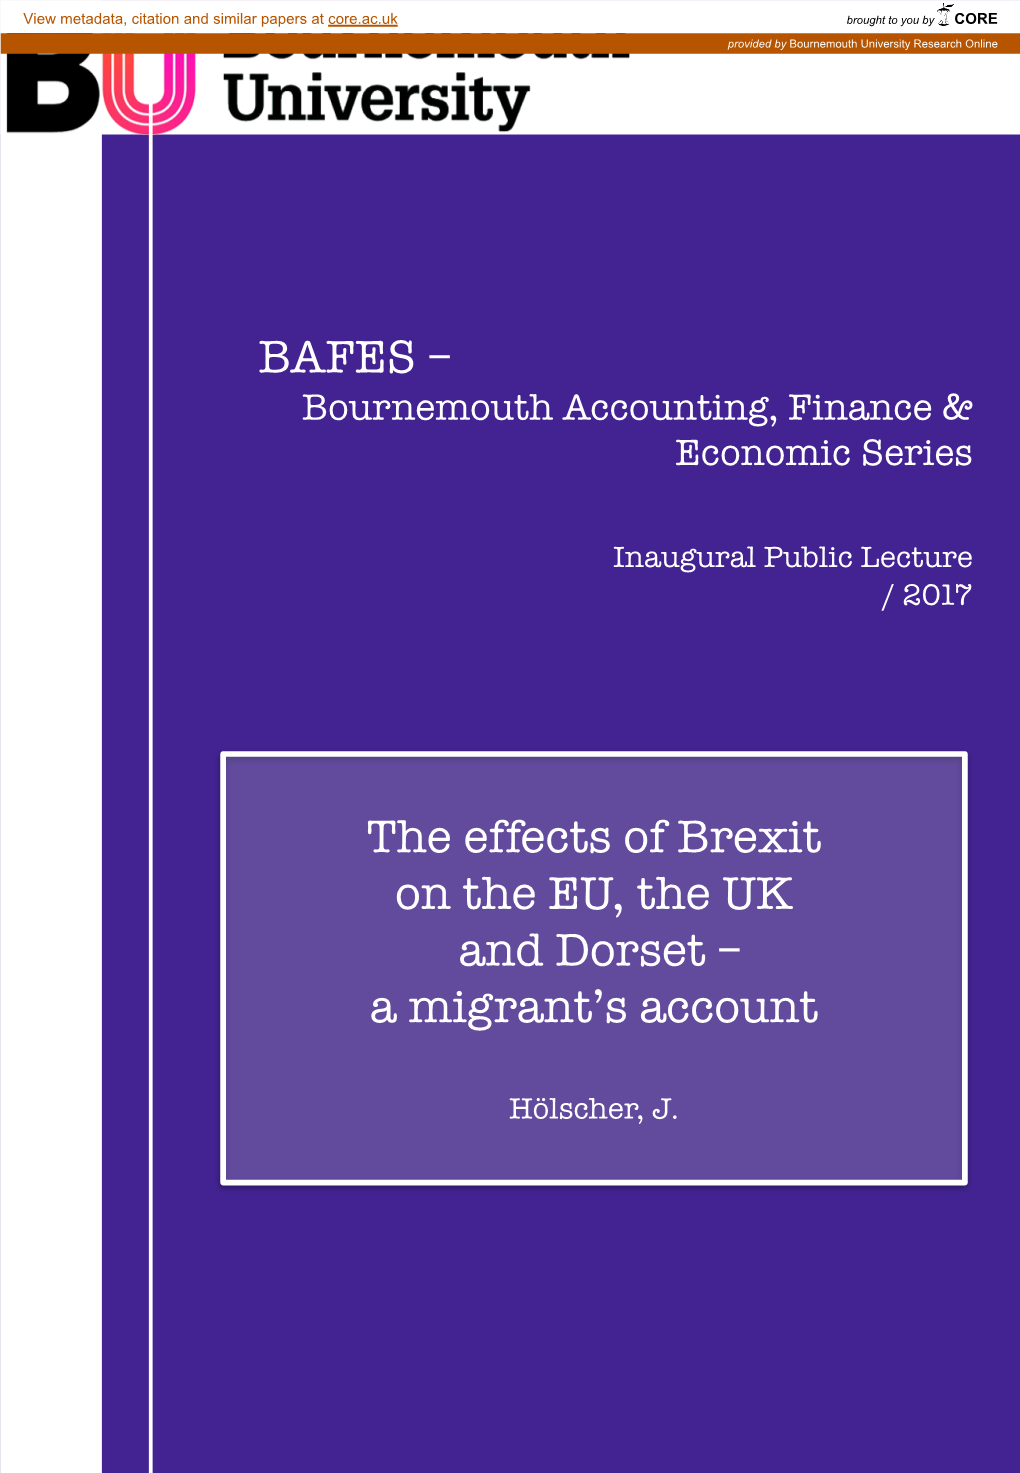 BAFES – the Effects of Brexit on the EU, the UK and Dorset